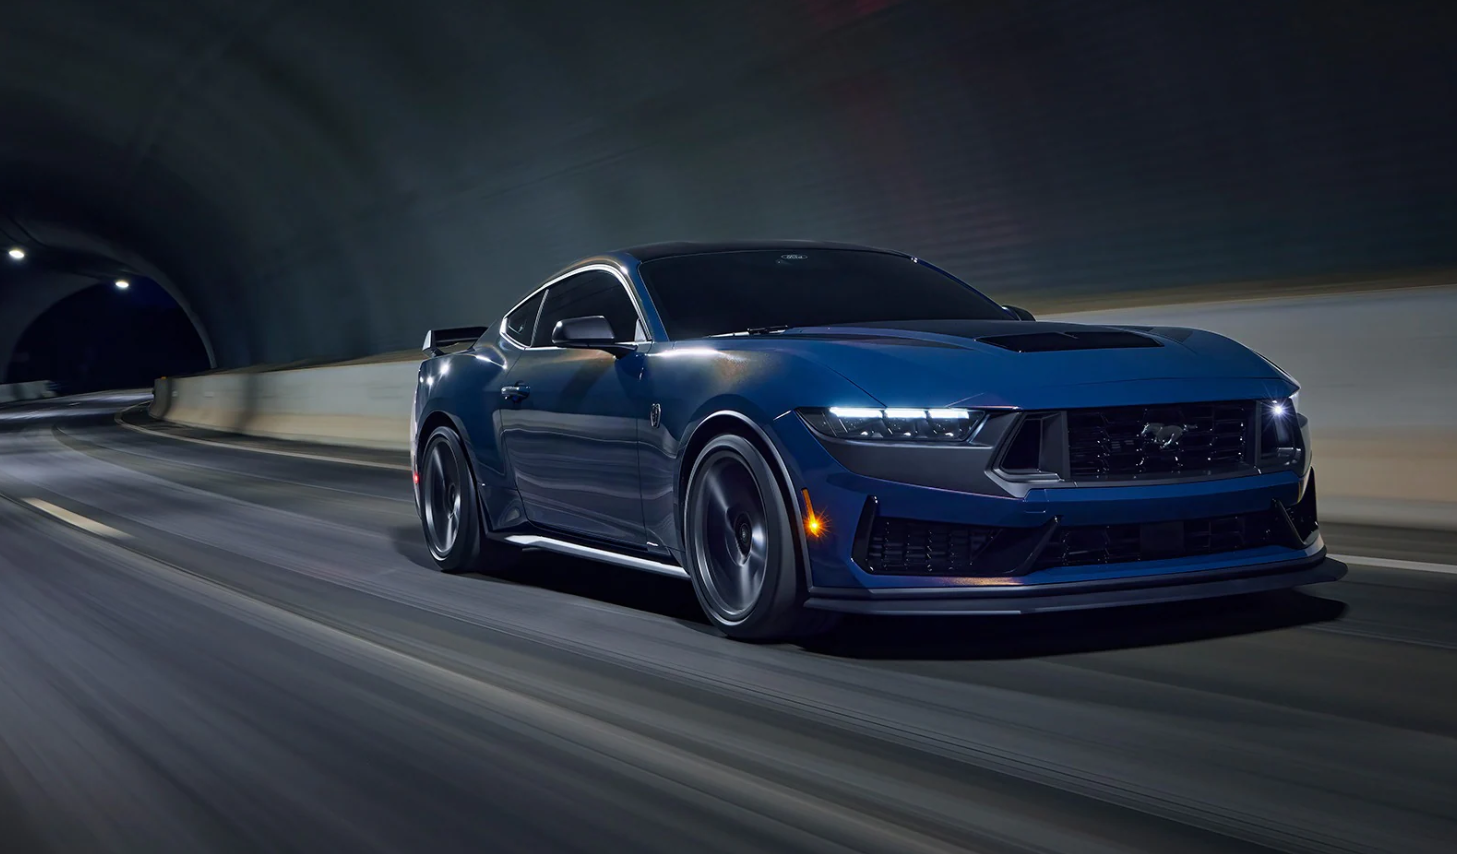 2025 Ford Mustang Ready For The Upcoming Launch - CarsJade.com